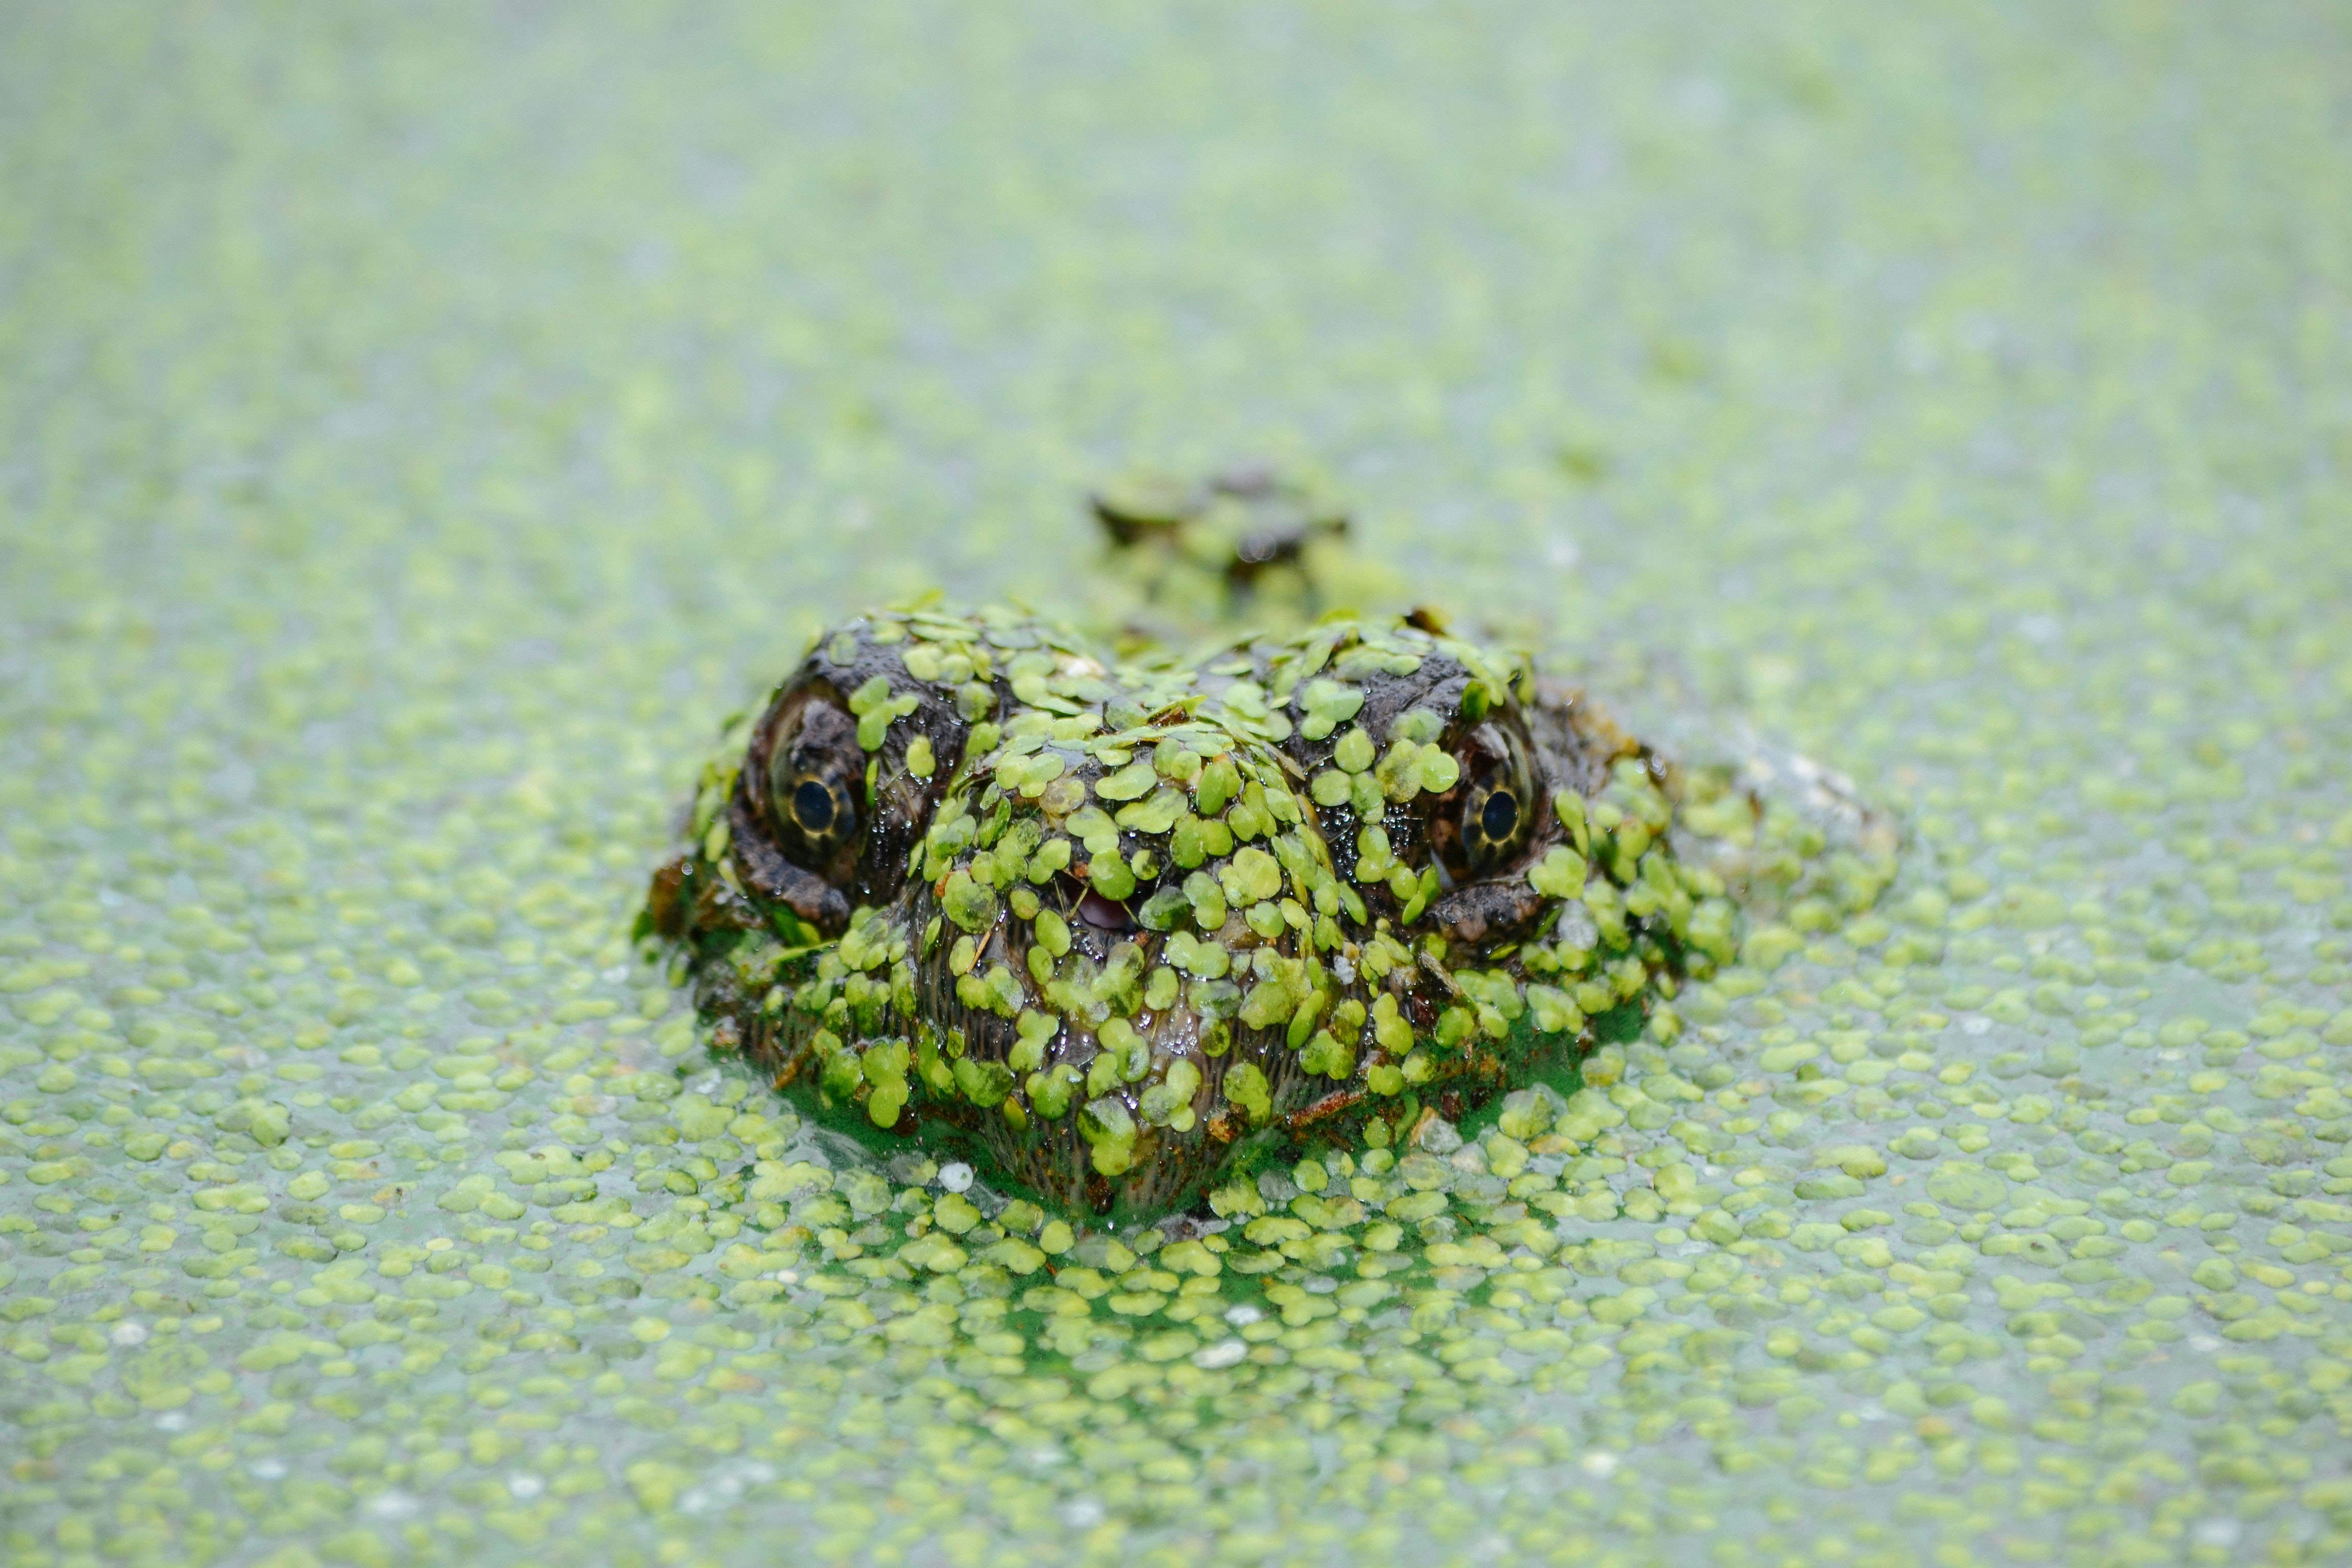 A reptilian creature poking its head up from the water. Both the reptile and the water are covered in tiny green leaves.